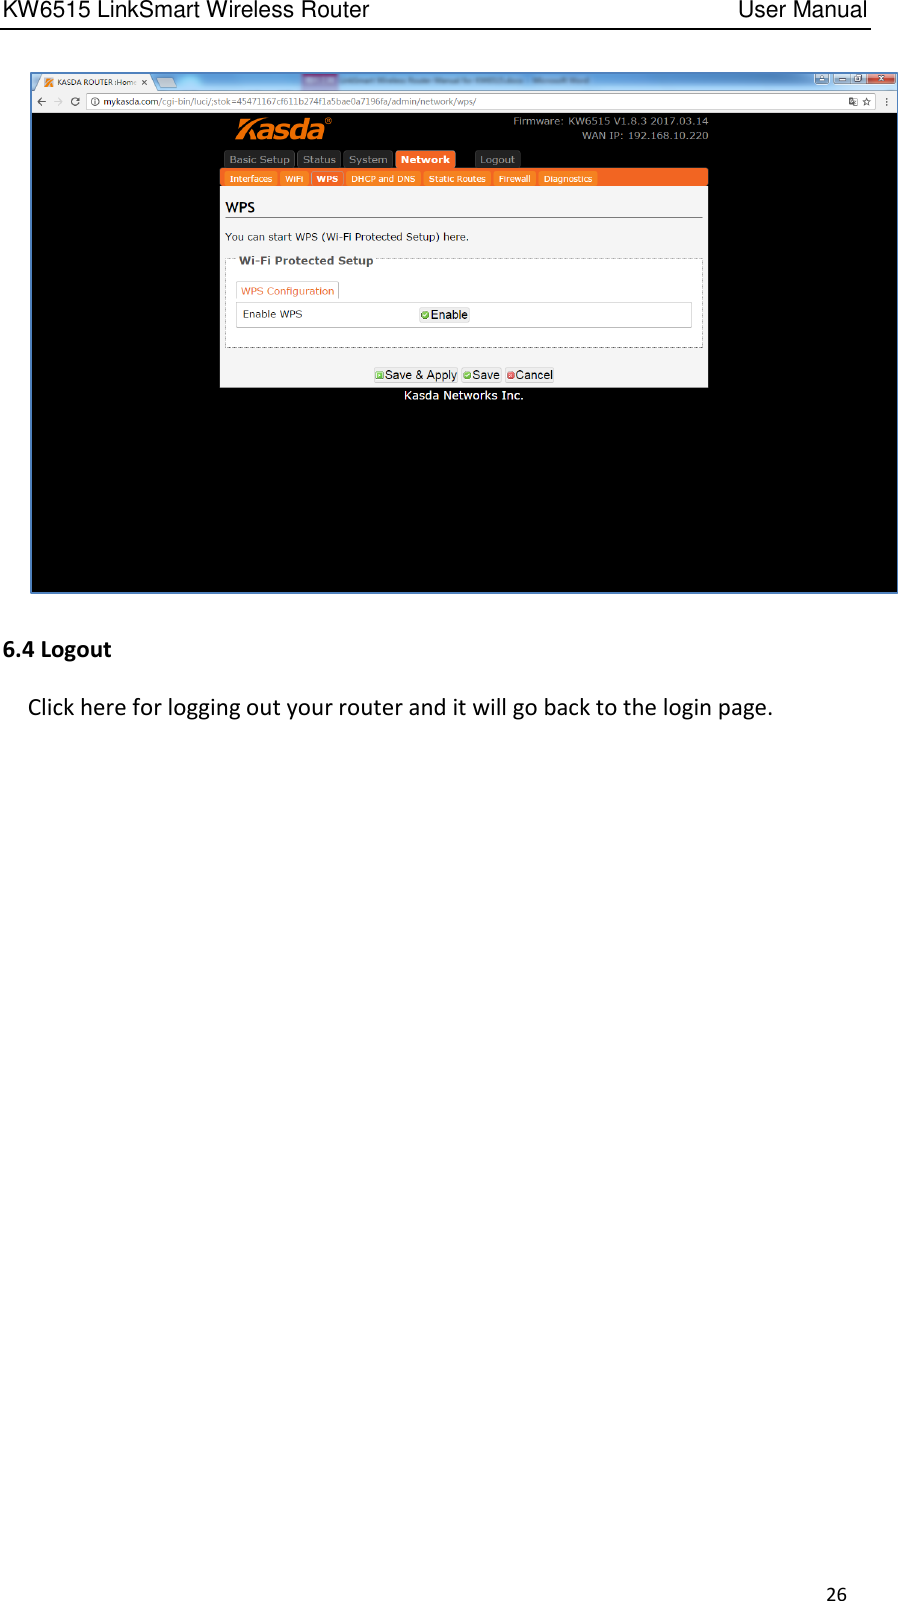 KW6515 LinkSmart Wireless Router         User Manual 26  6.4 Logout   Click here for logging out your router and it will go back to the login page.           